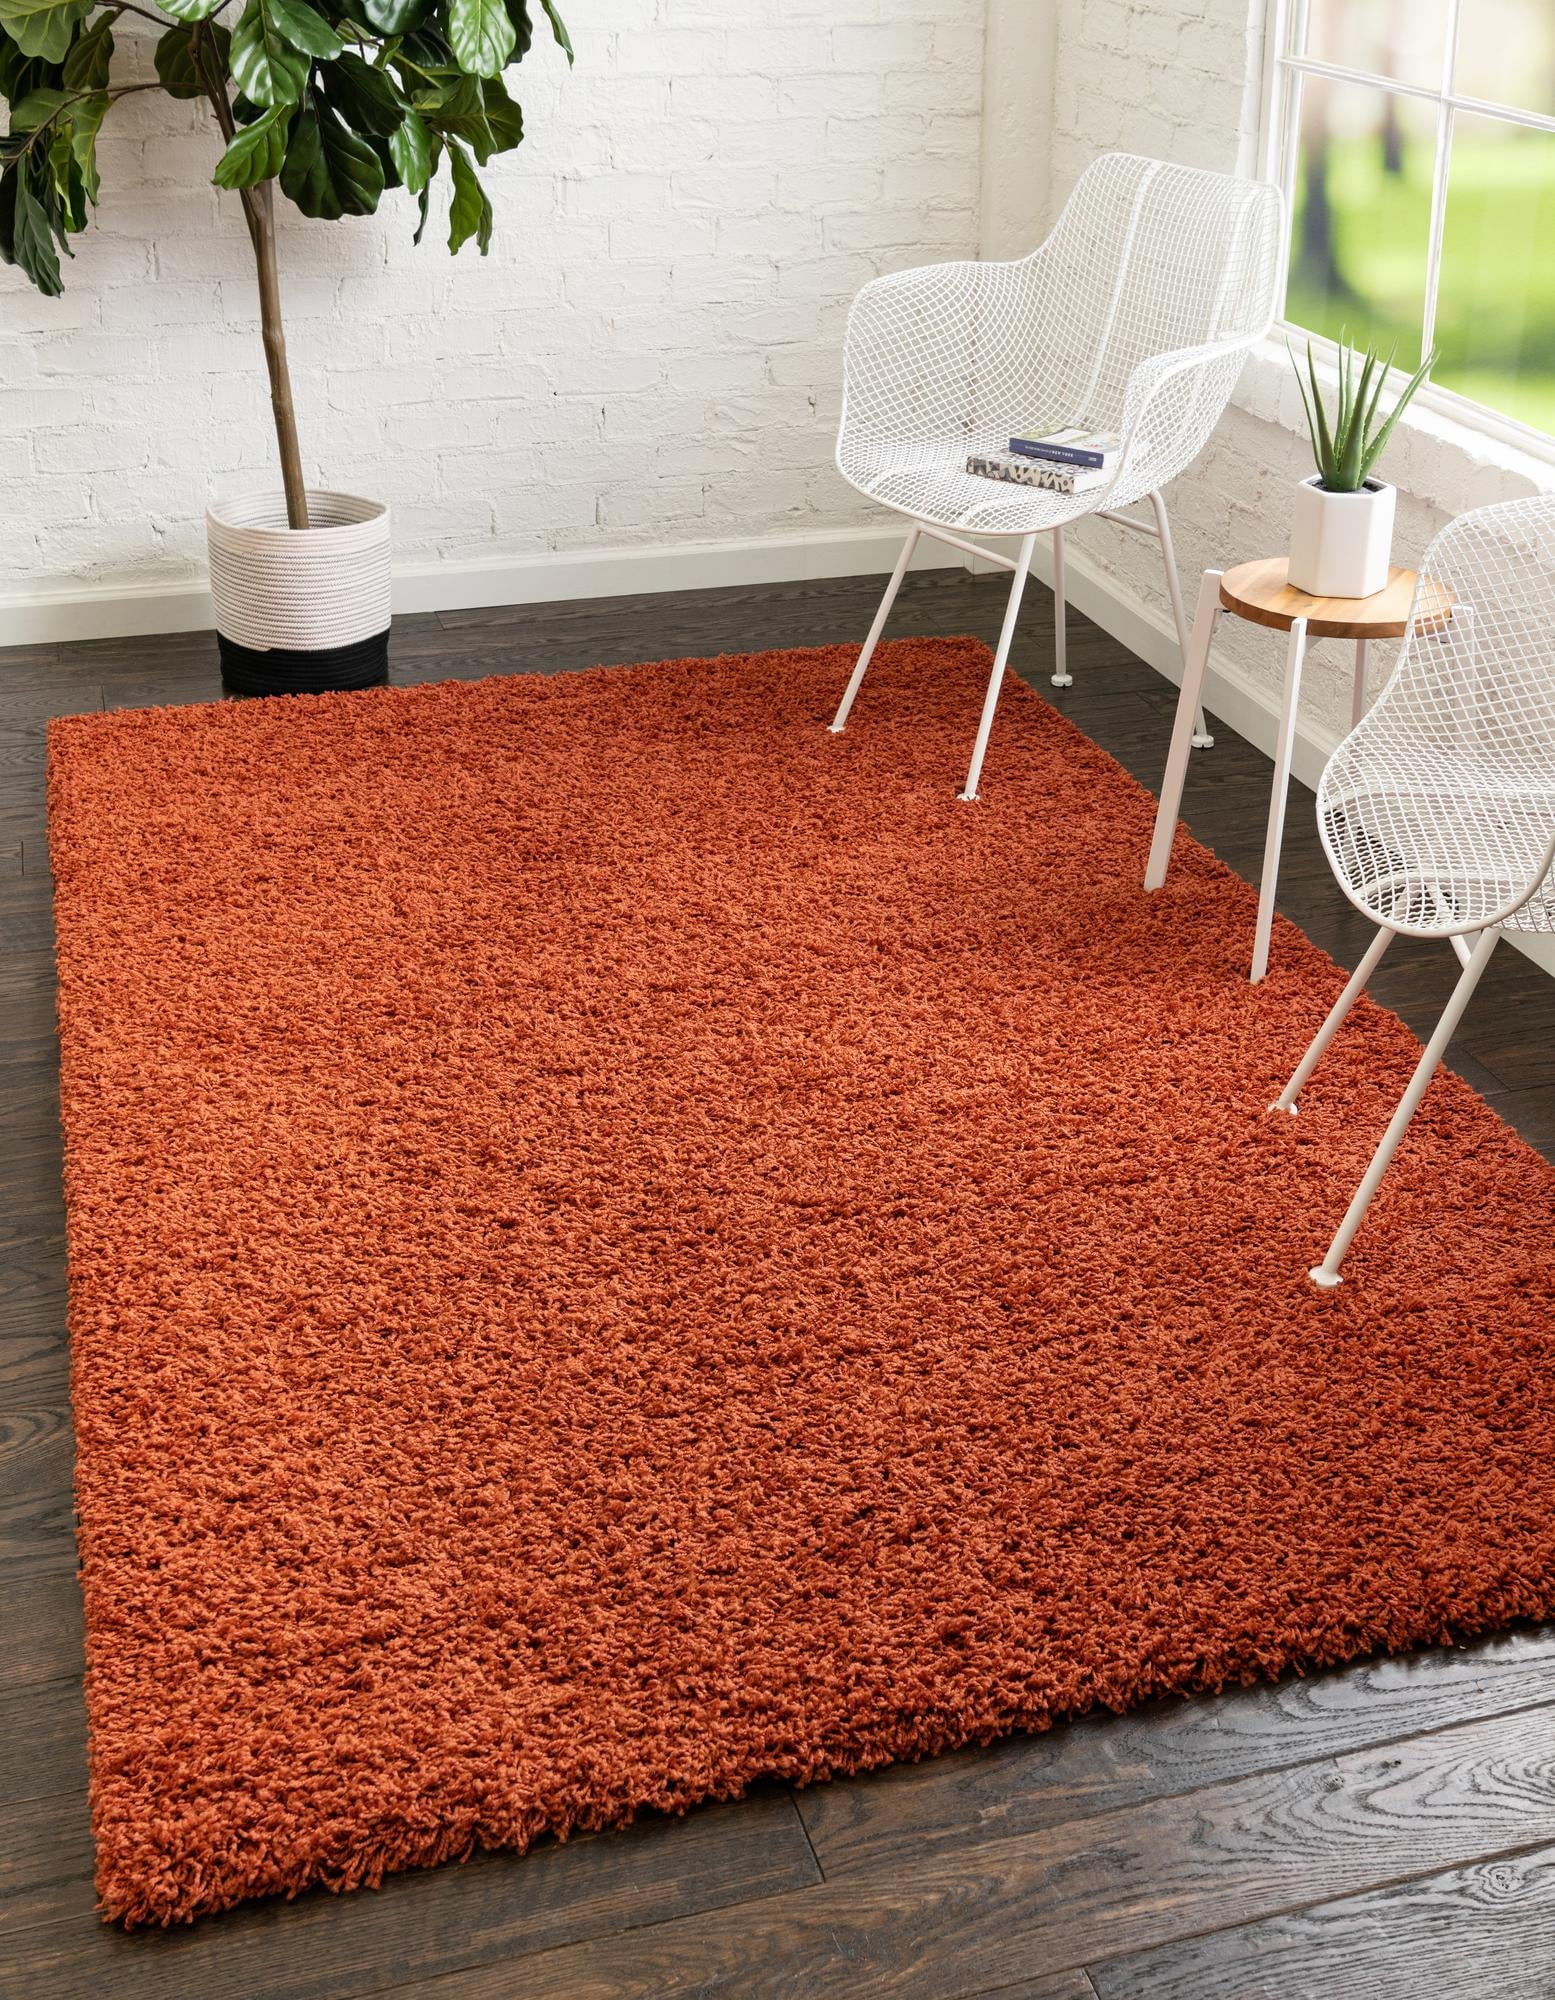 Solid Shag Collection Rug – 3' x 5' Terracotta Shag Rug Perfect  For Entryways, Kitchens, Breakfast Nooks, Accent Pieces